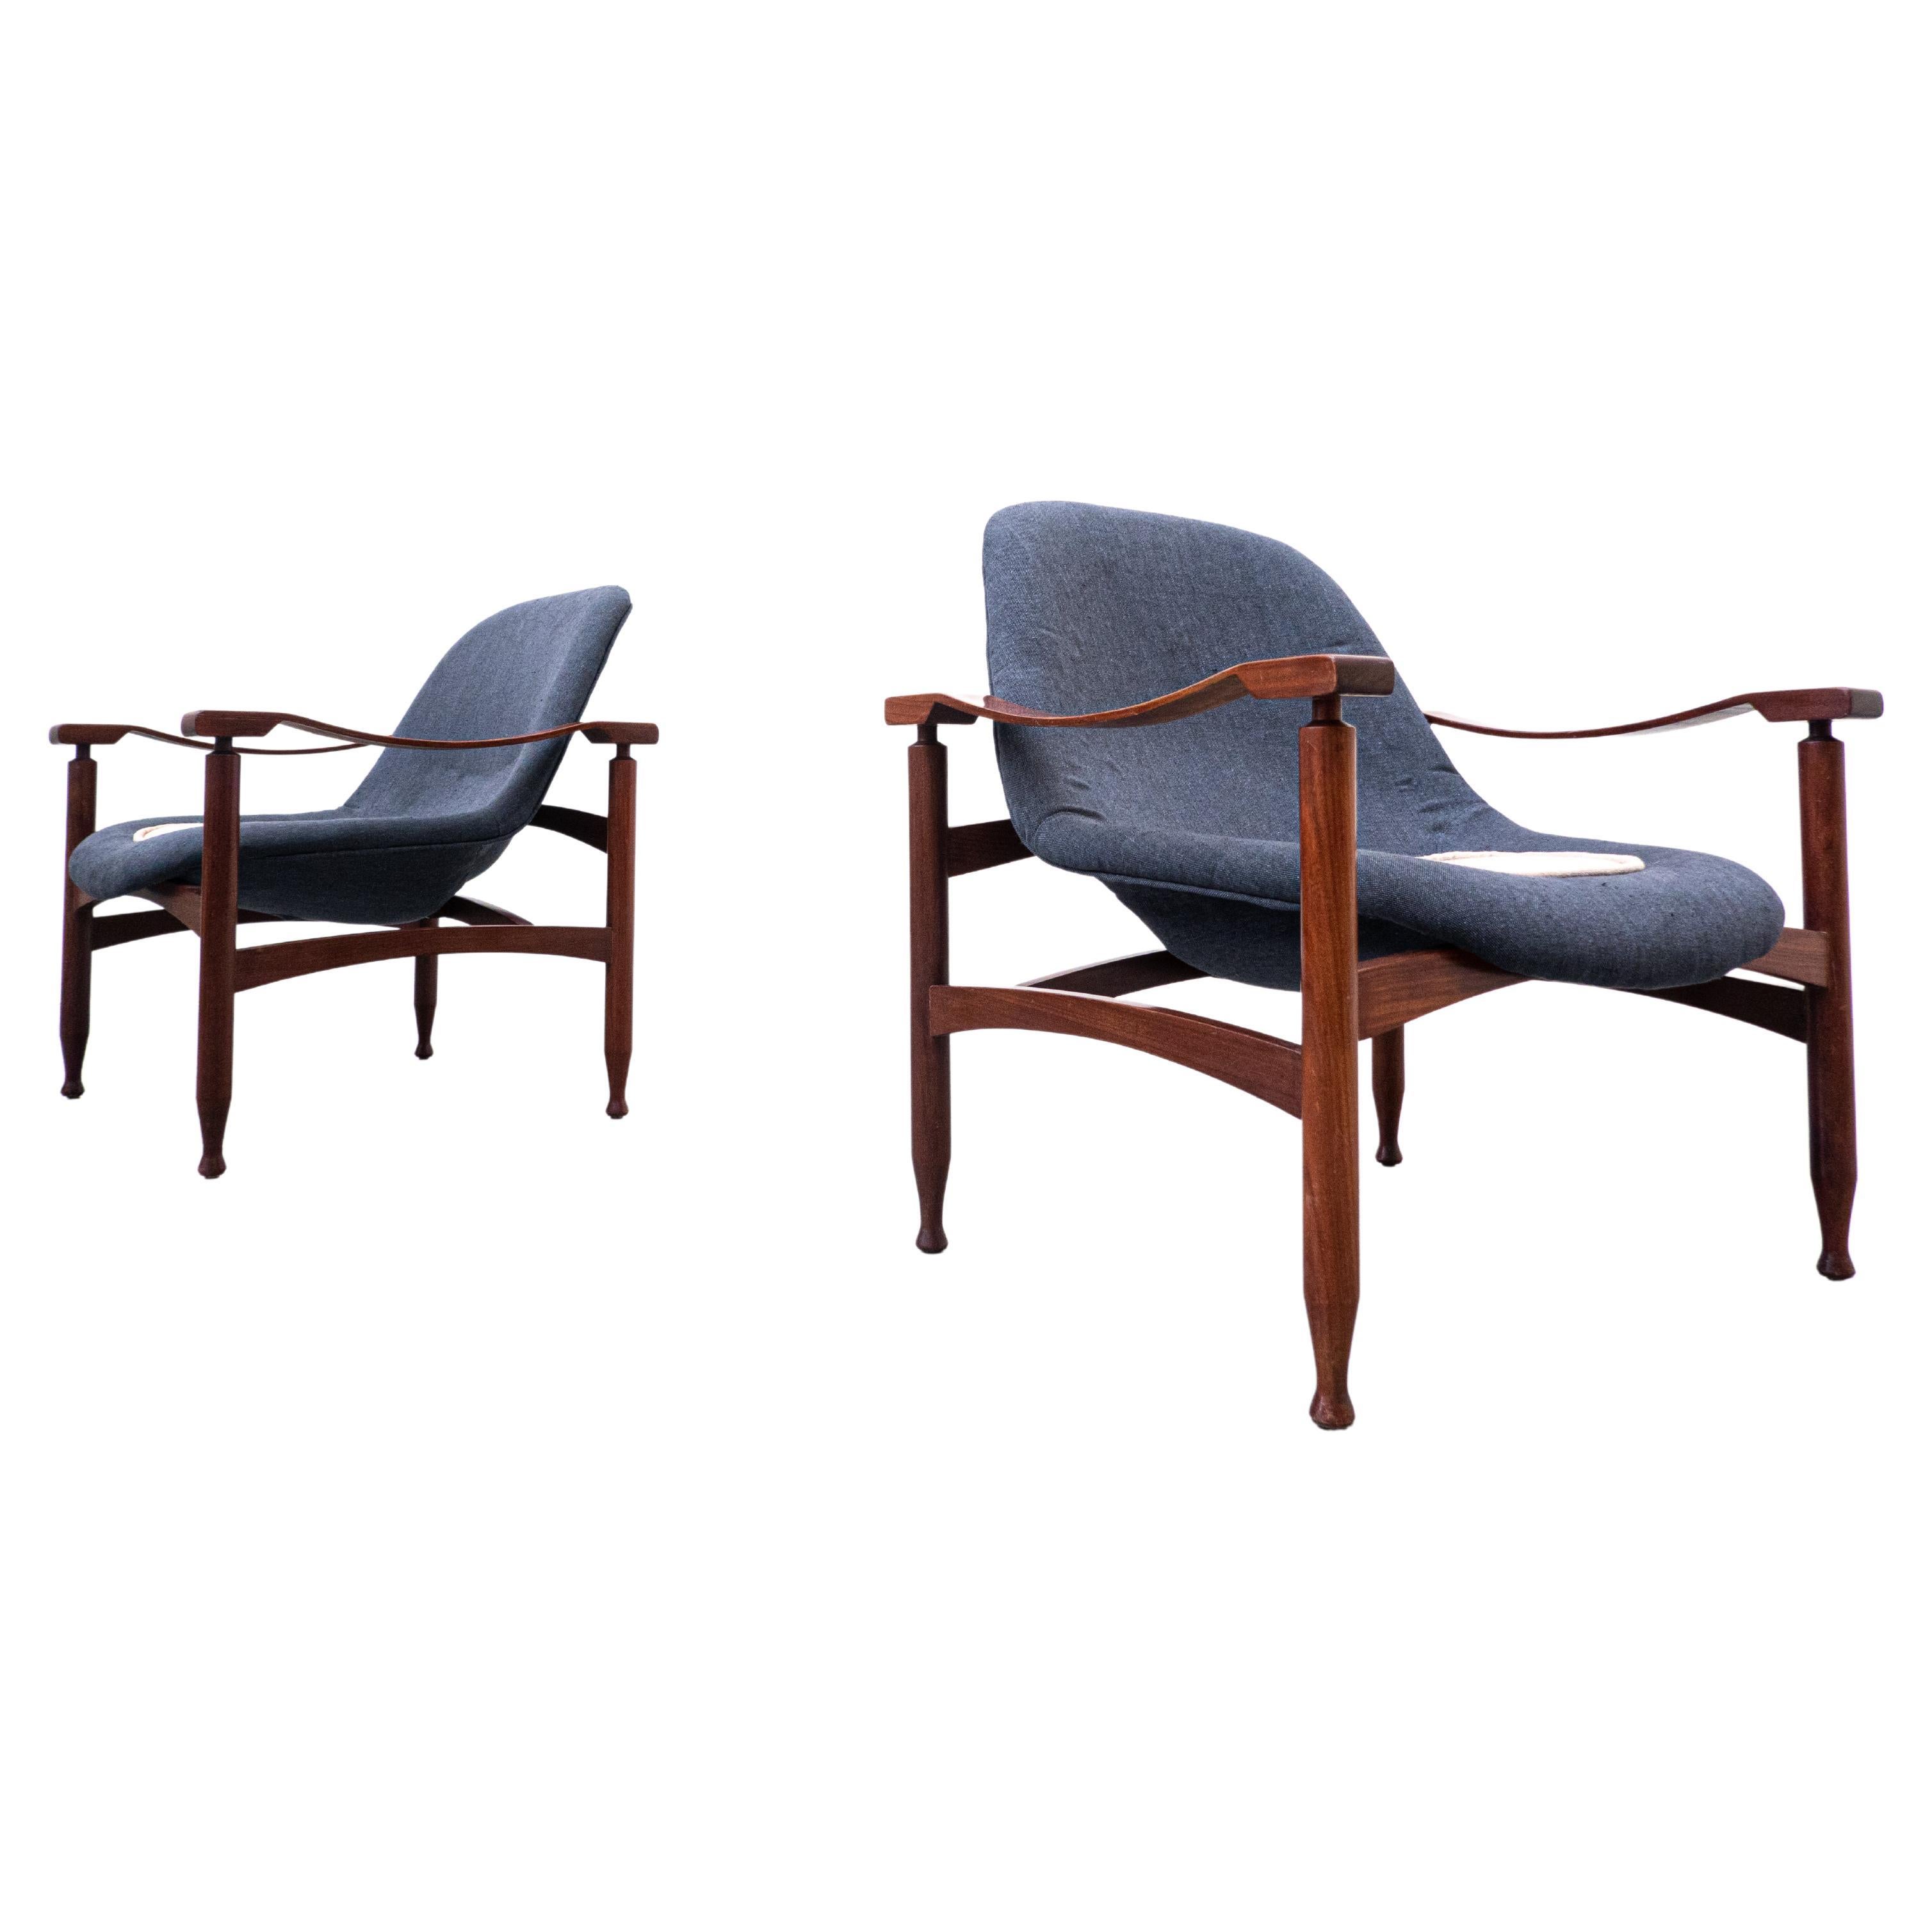 Pair of Blue Armchairs by Jorge Zalszupin, Wood and Fabric, Brasil, 1960s For Sale